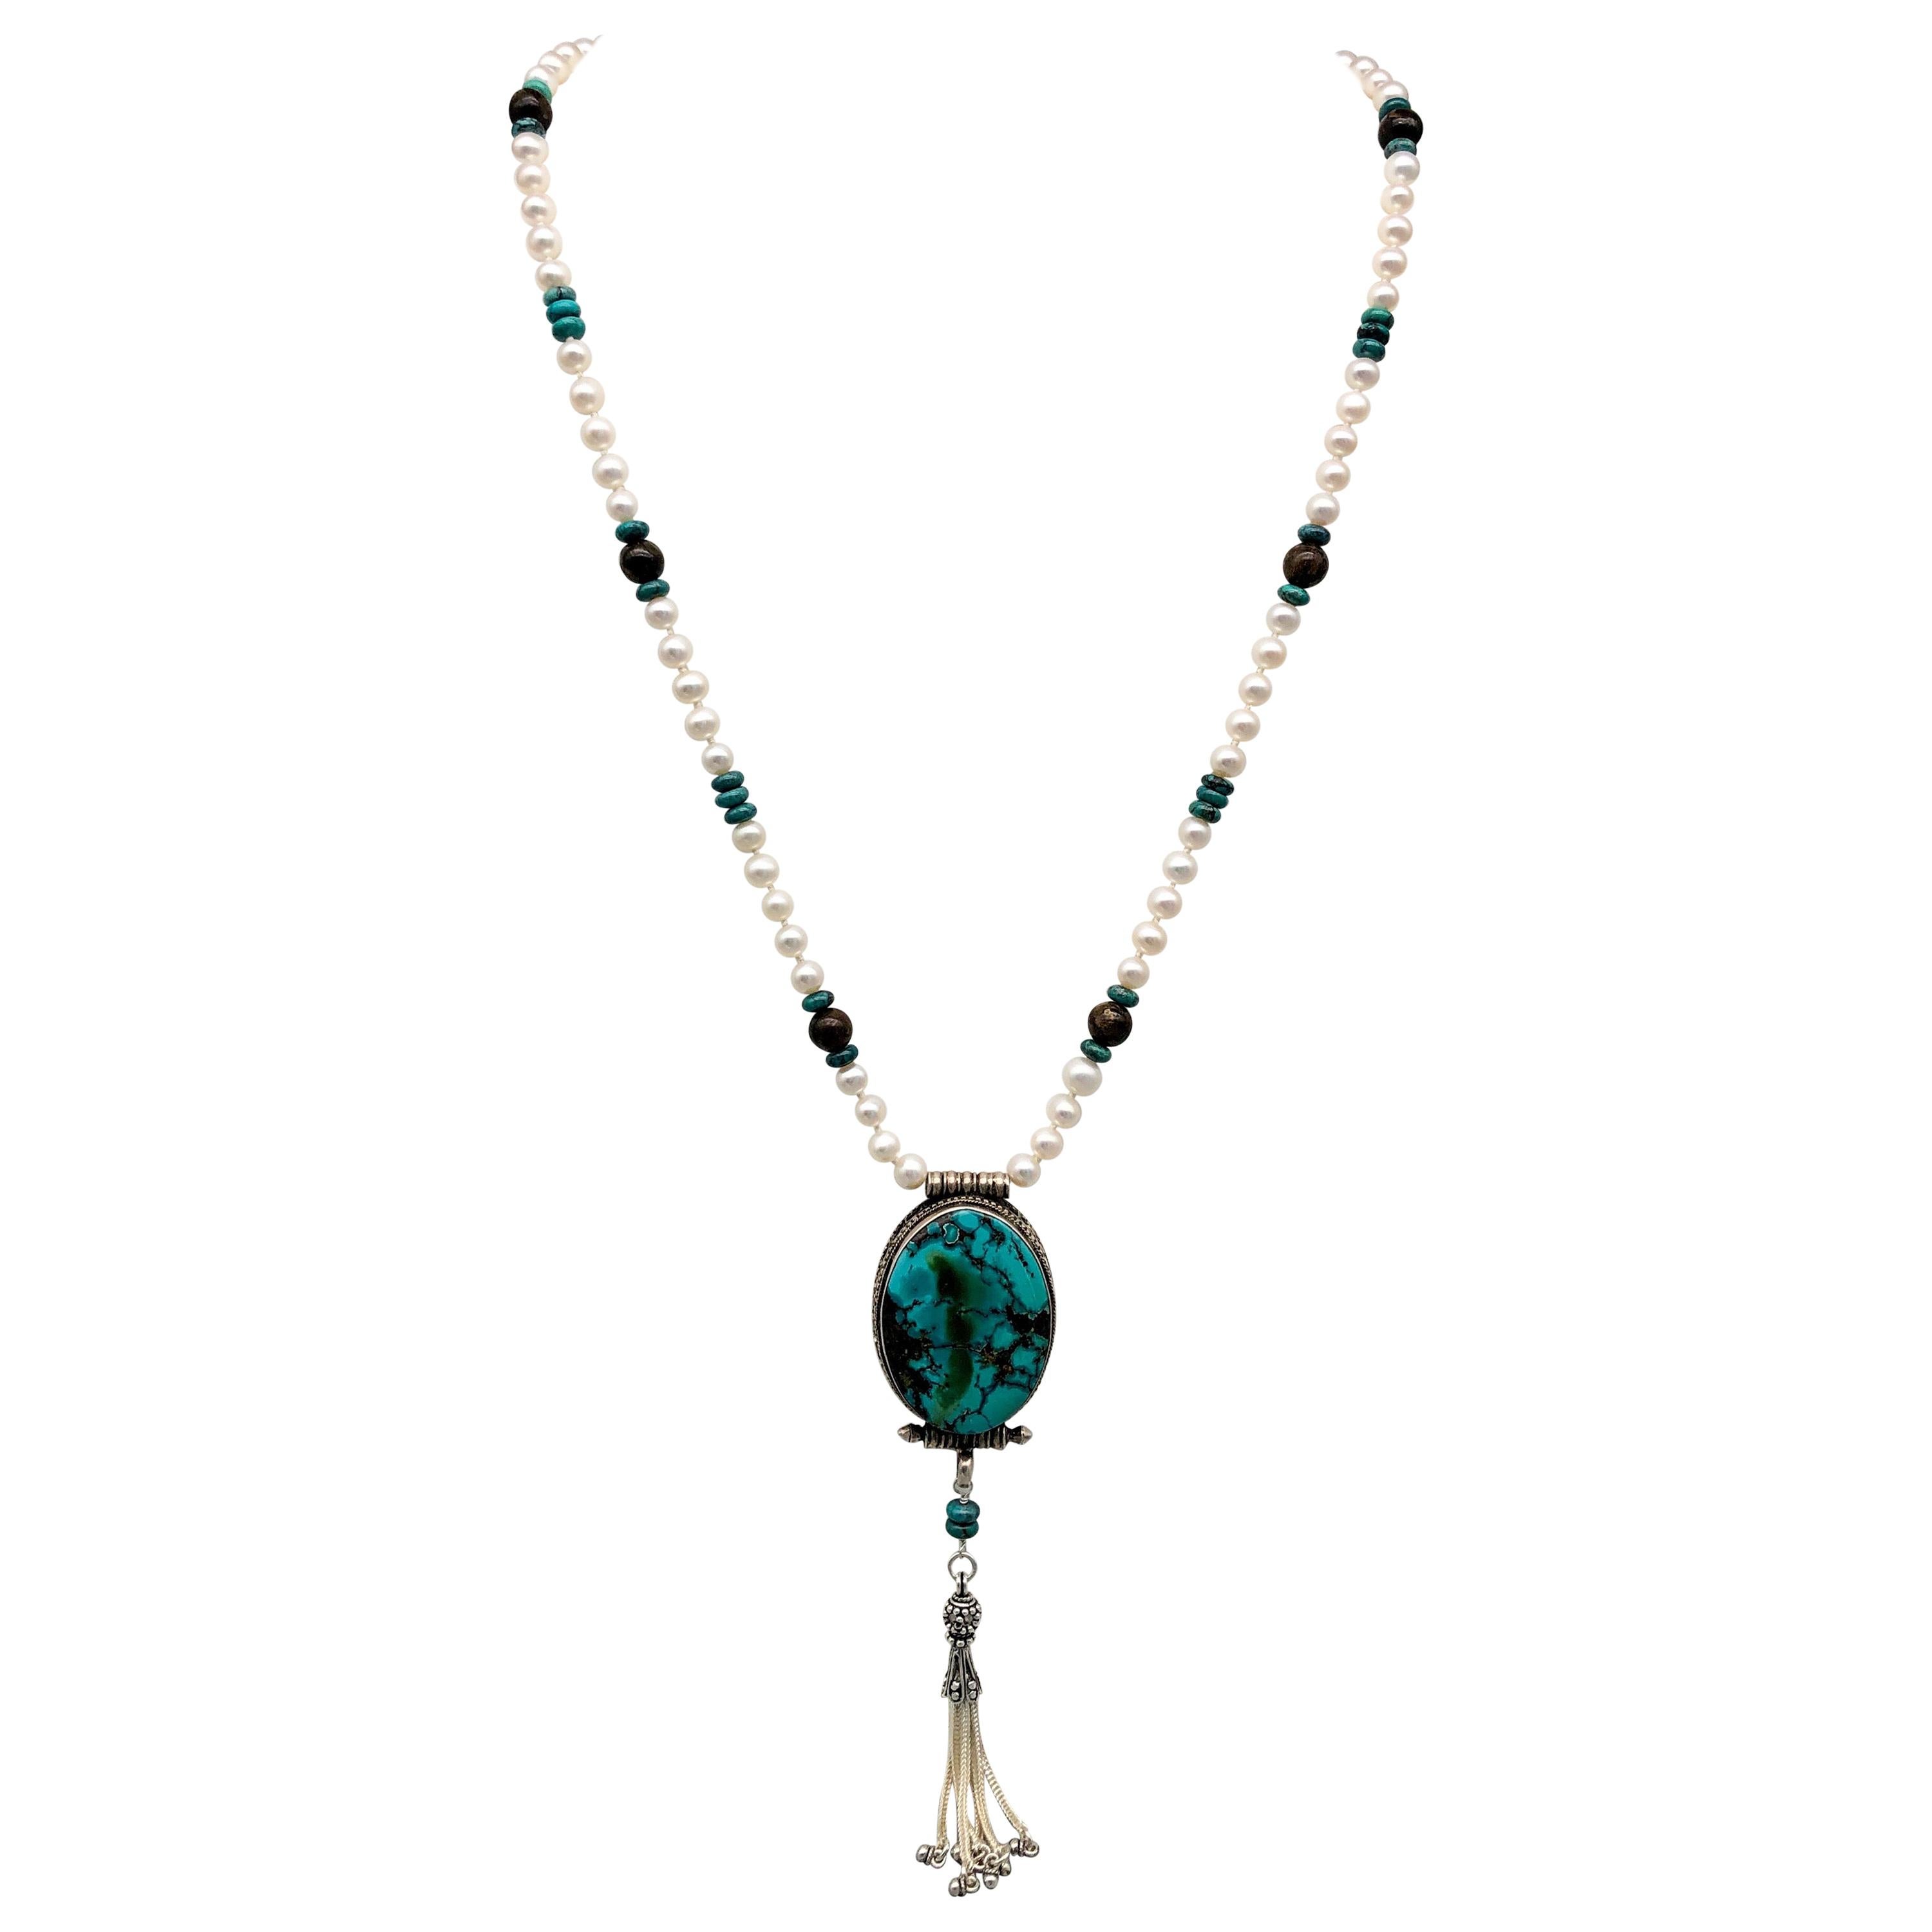 
Introducing the breathtaking One-of-a-Kind Turquoise and Silver Tibetan Pendant Necklace - a true work of art that exudes elegance and sophistication. This long necklace features a stunning piece of Turquoise set in a Silver Tibetian pendant that